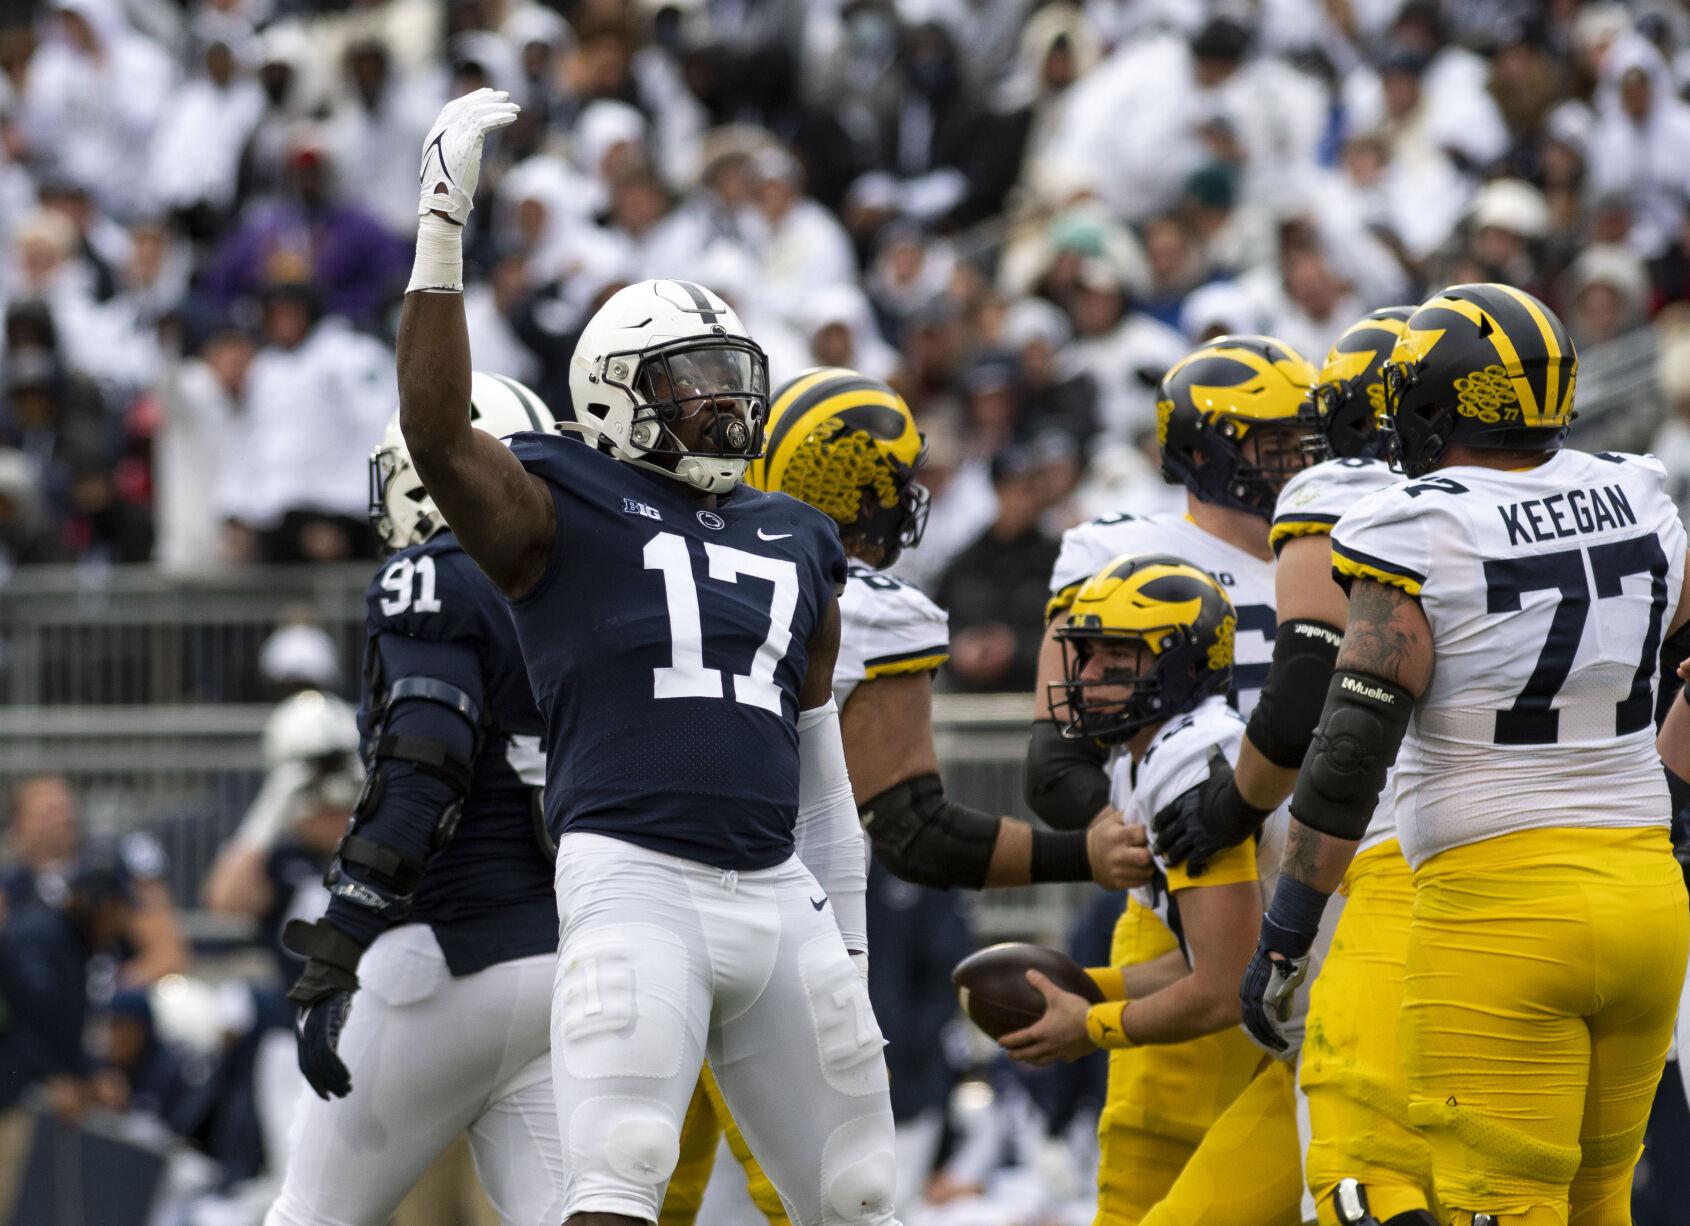 Penn State defensive end Arnold Ebiketie opts out of Outback Bowl